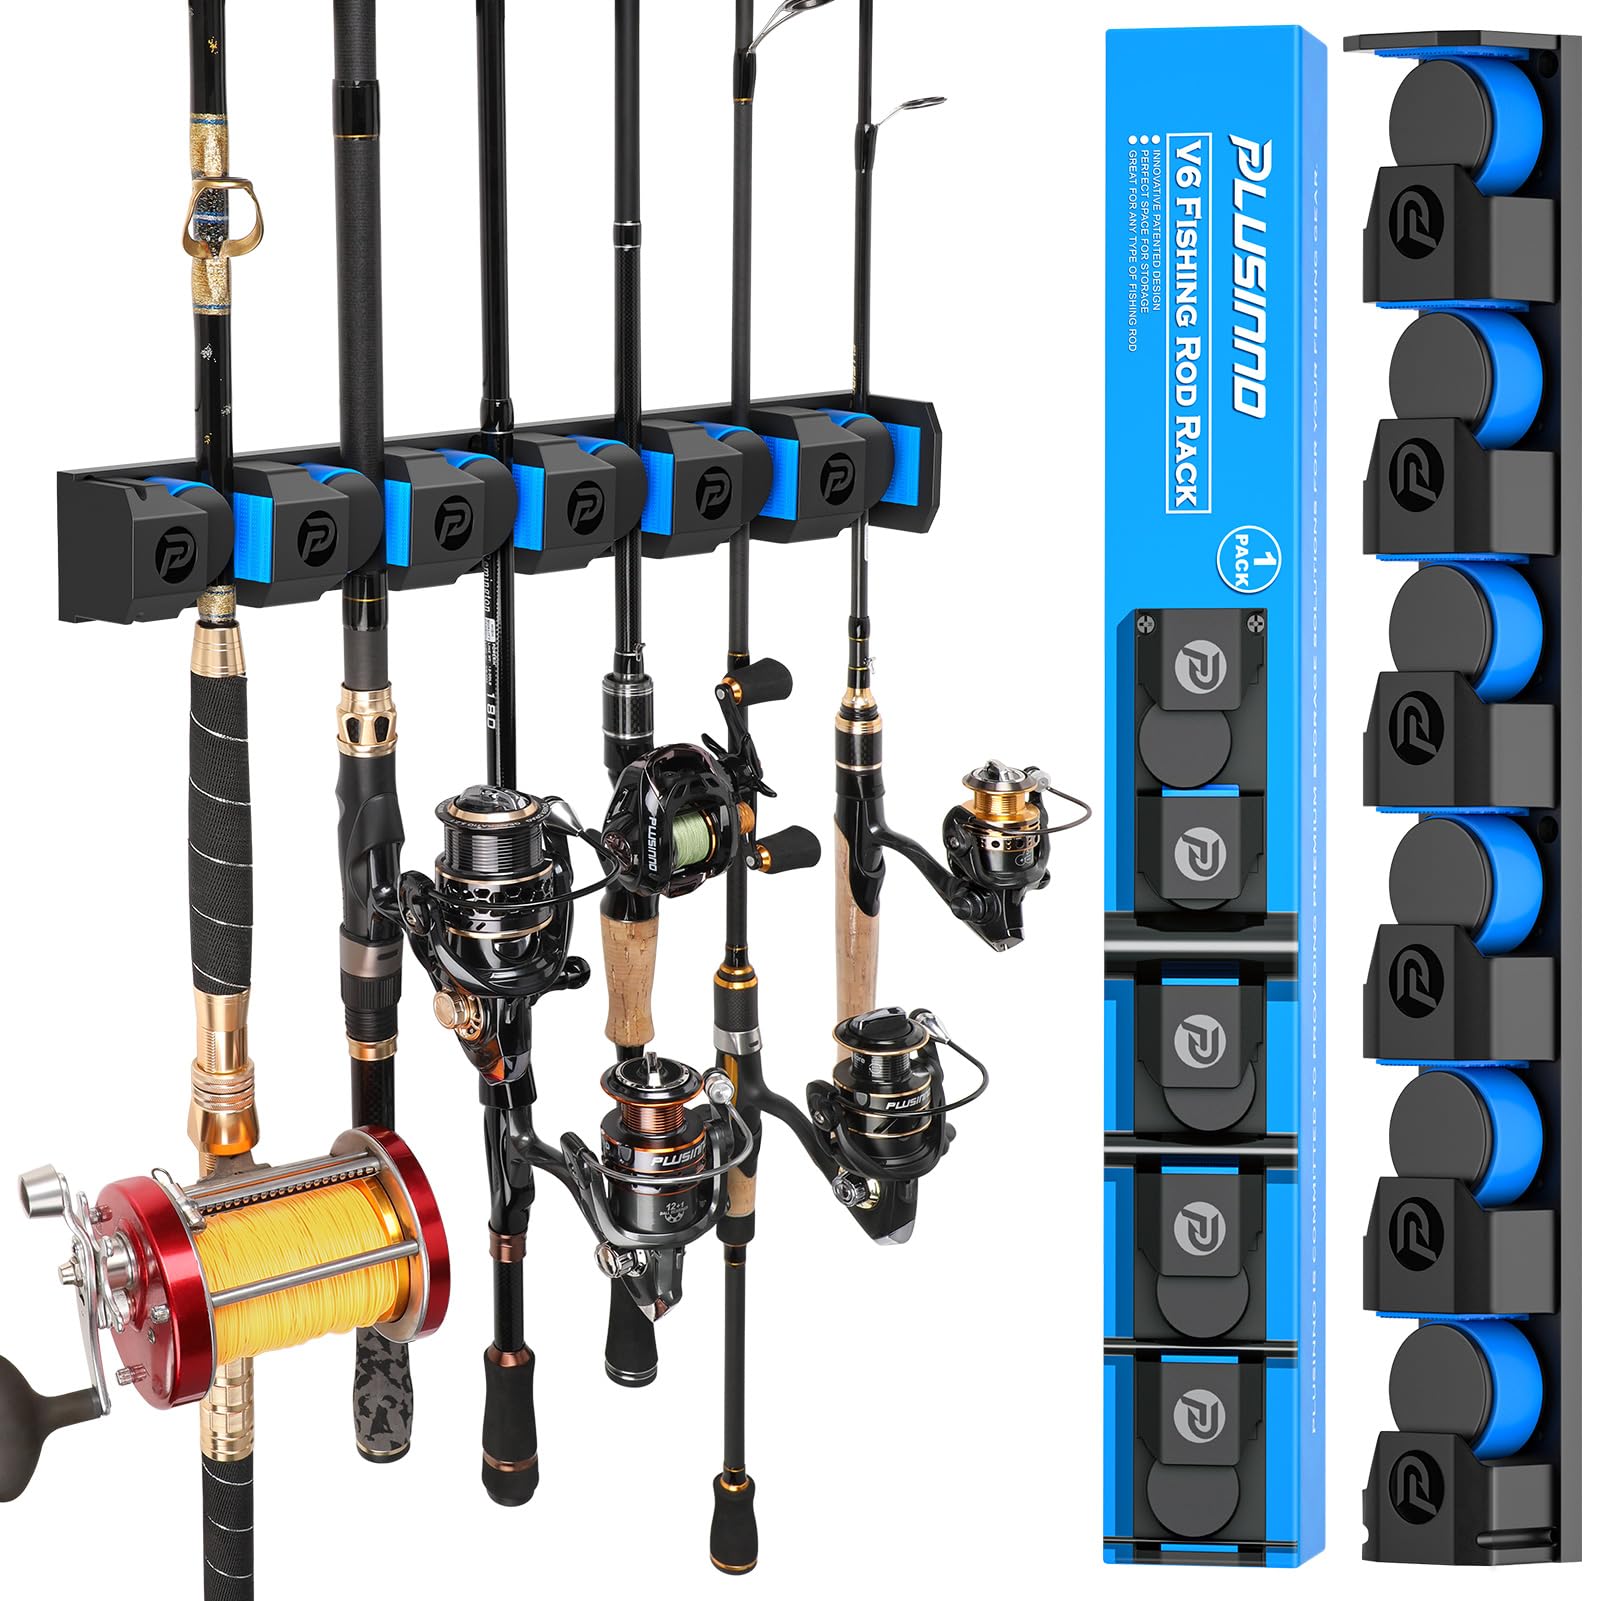 PLUSINNO Vertical Fishing Rod Holder, Wall Mounted Fishing Rod Rack,  Fishing Pole Holder Holds Up to 9 Rods or Combos, Fishing Rod Holders for  Garage, Fits Most Rods of Diameter 3-19mm 